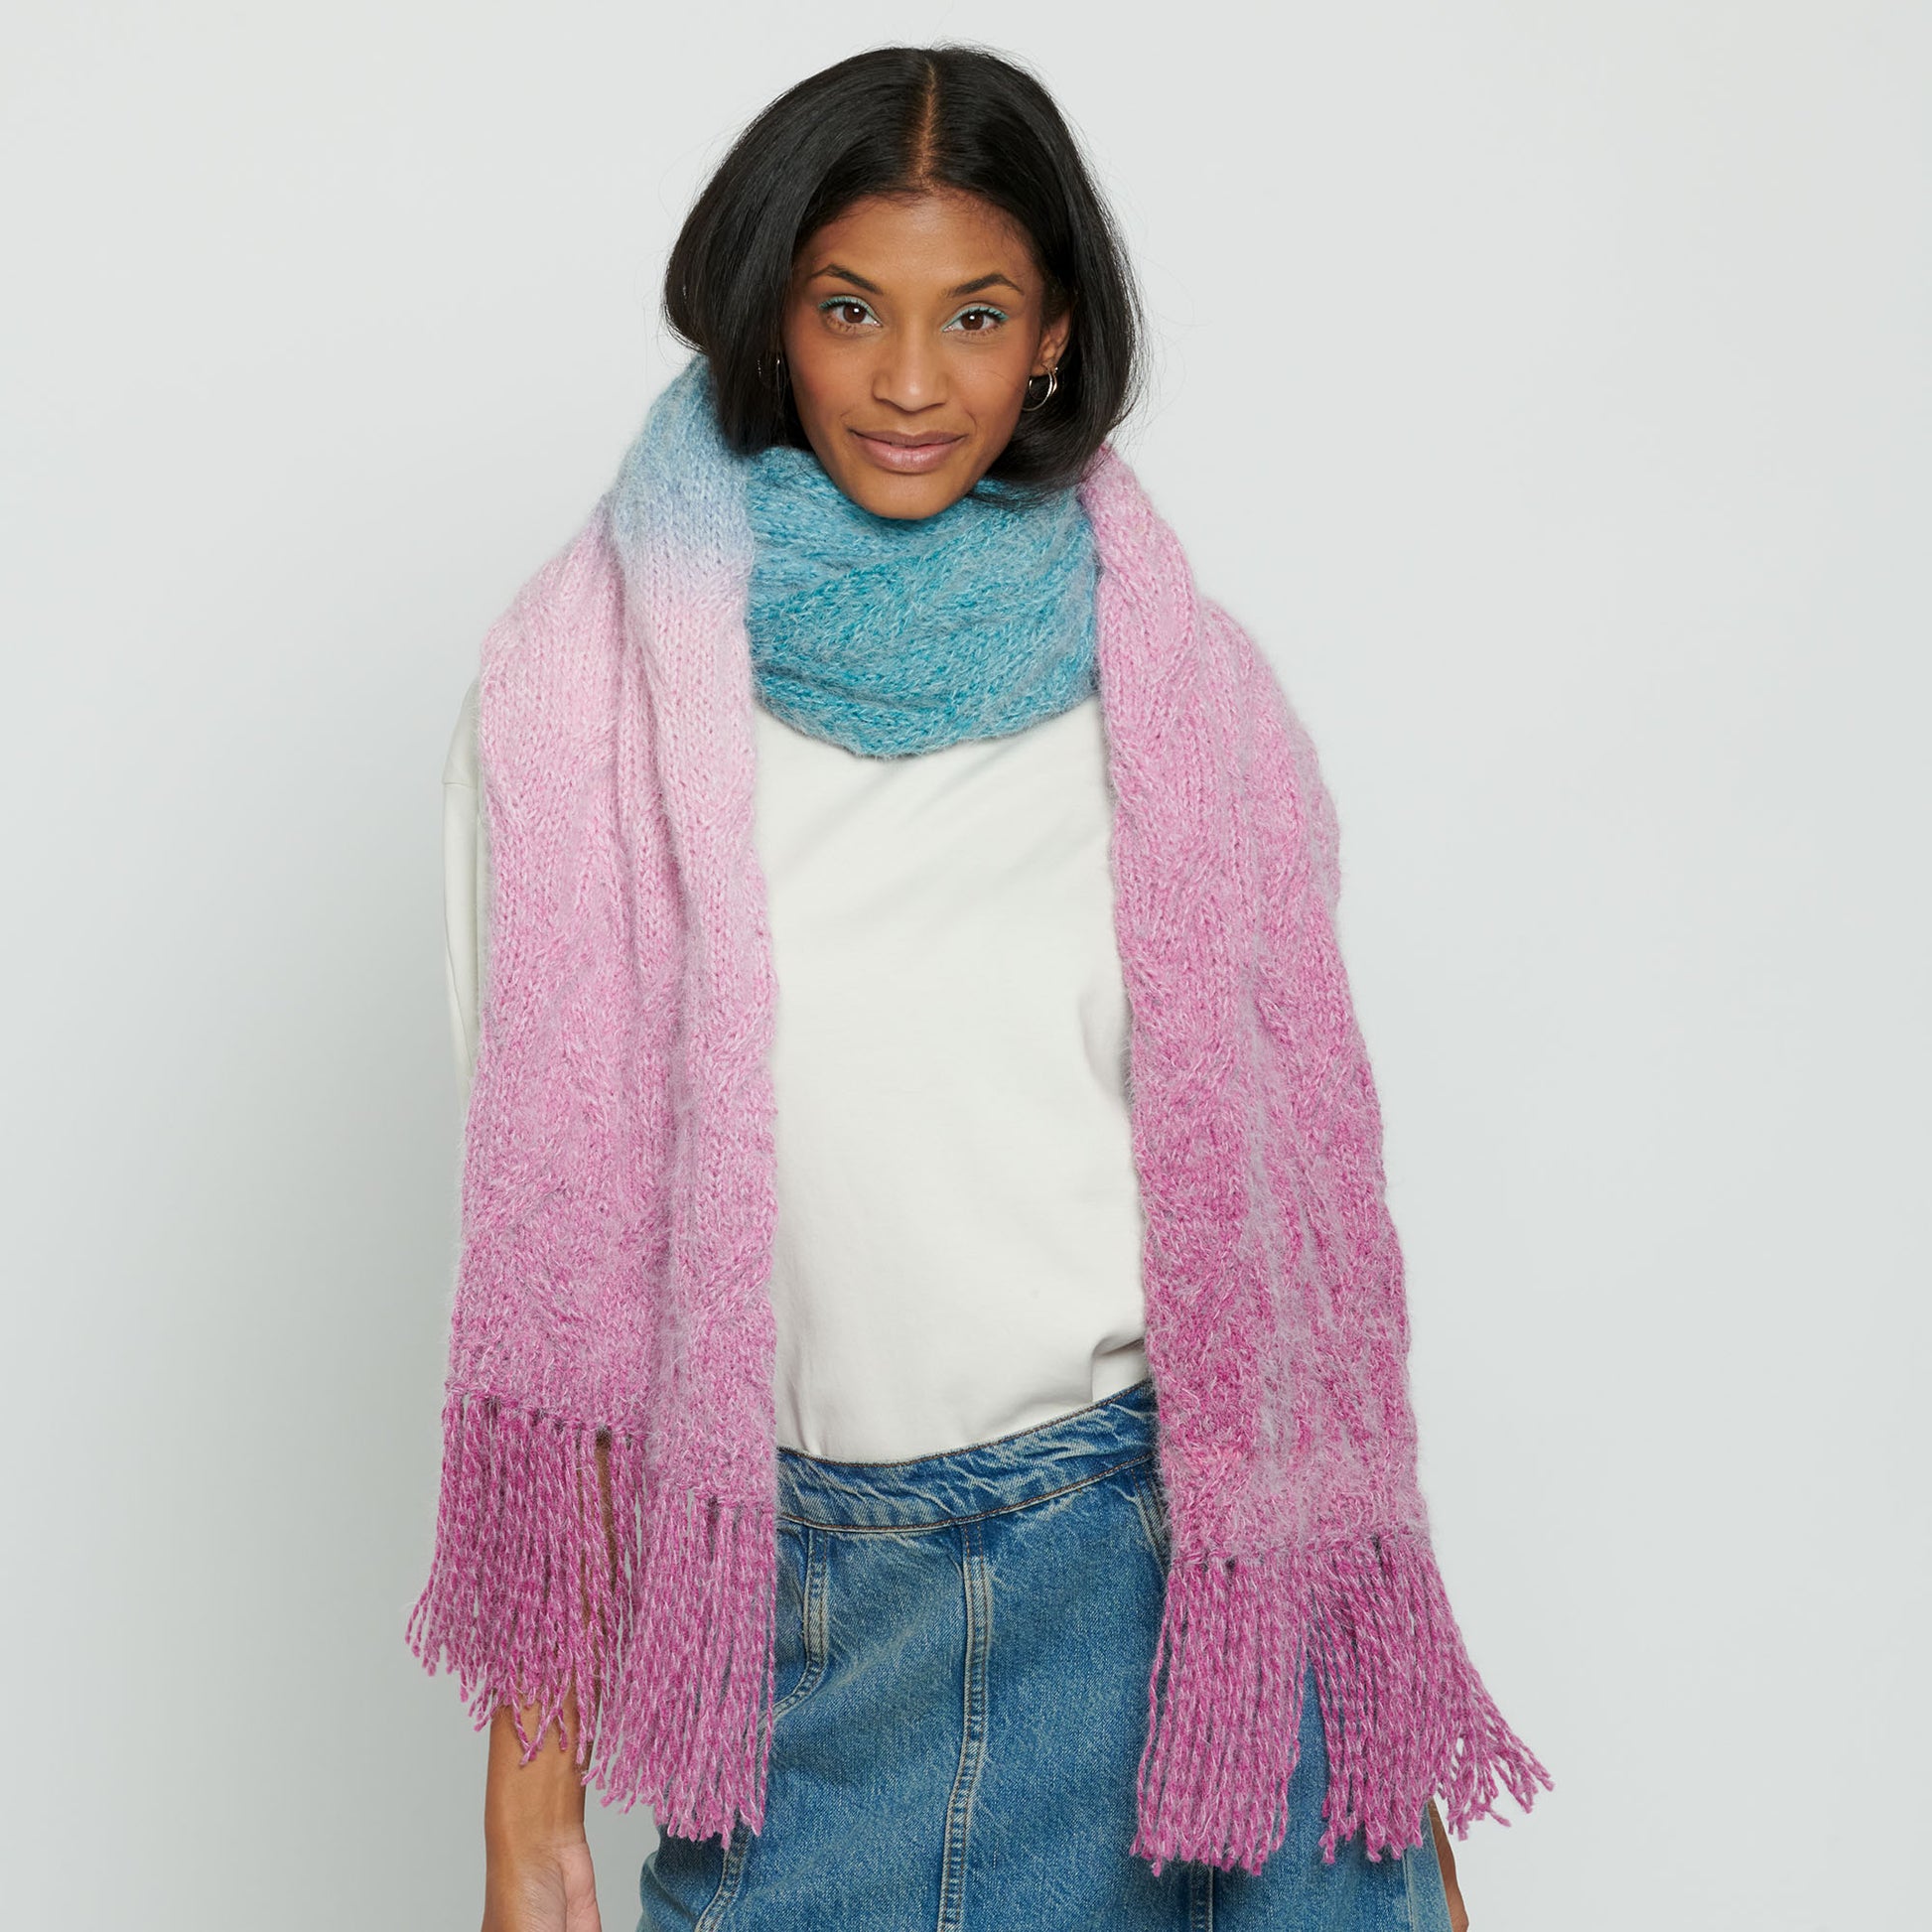 Caron Tuck Cables Big Knit Scarf Caron Tuck Cables Big Knit Scarf